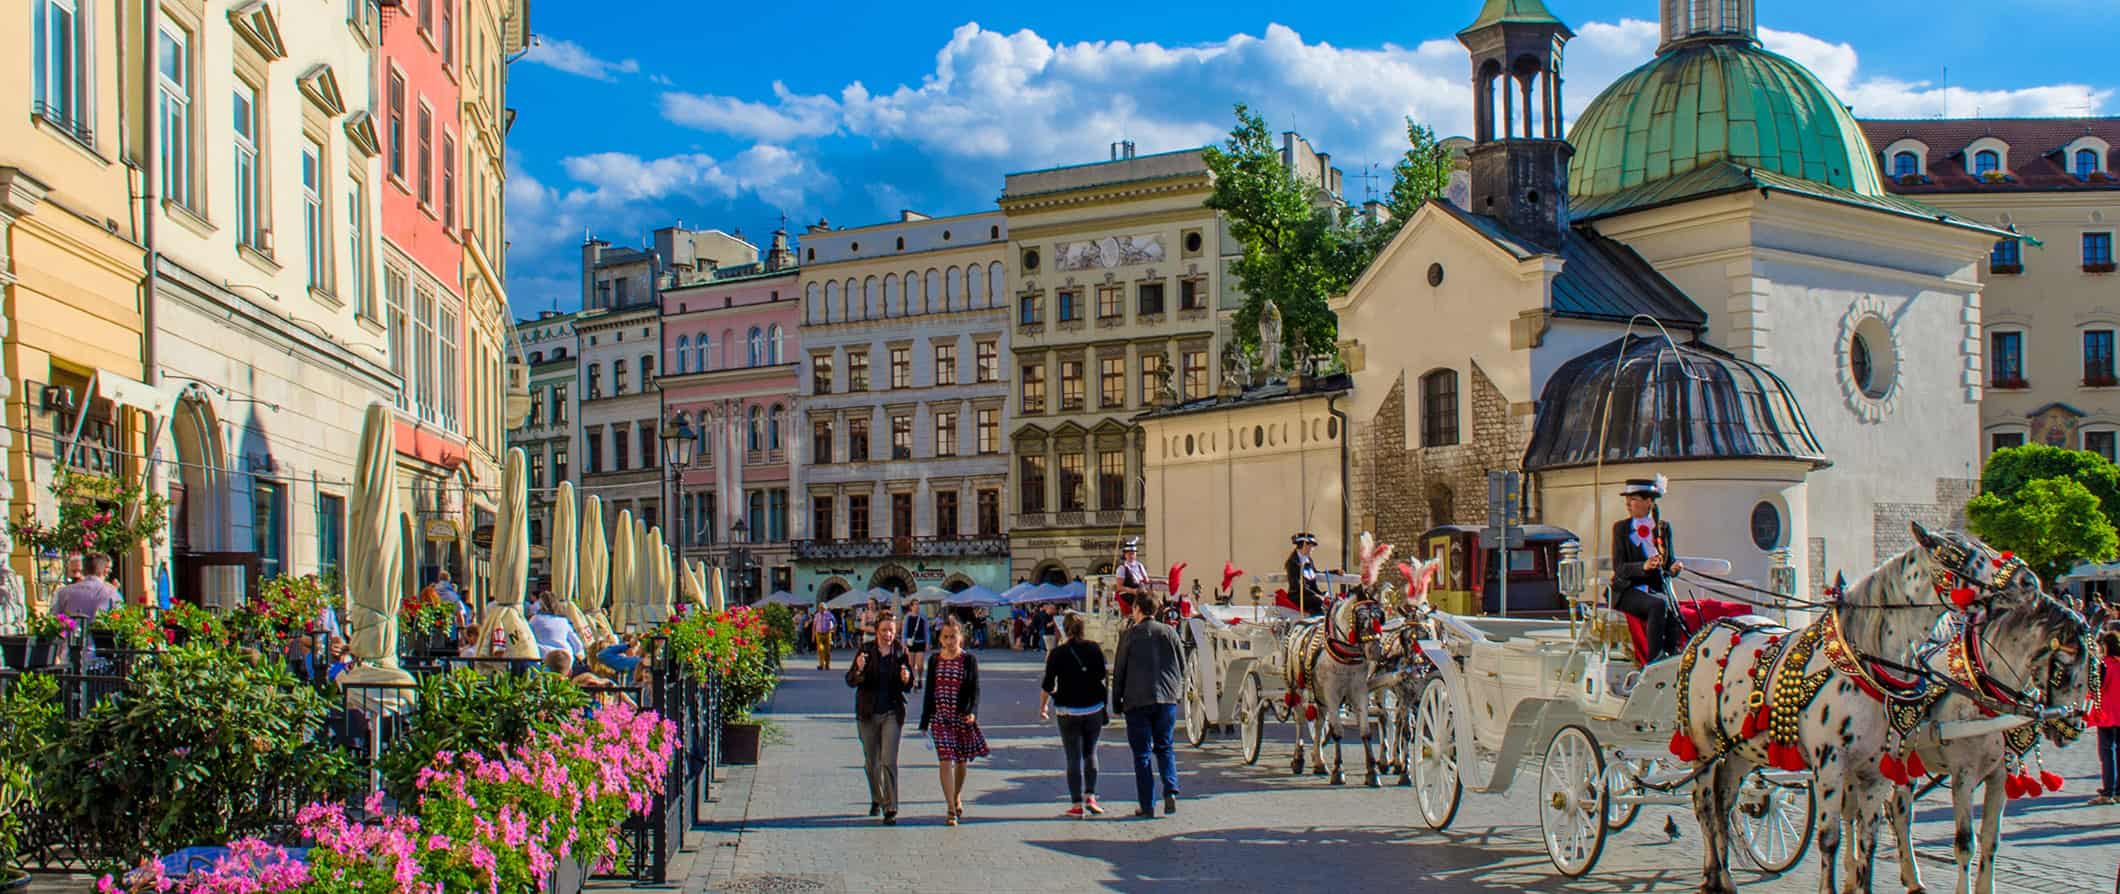 view of Krakow's historical city square with people walking around on a sunny day